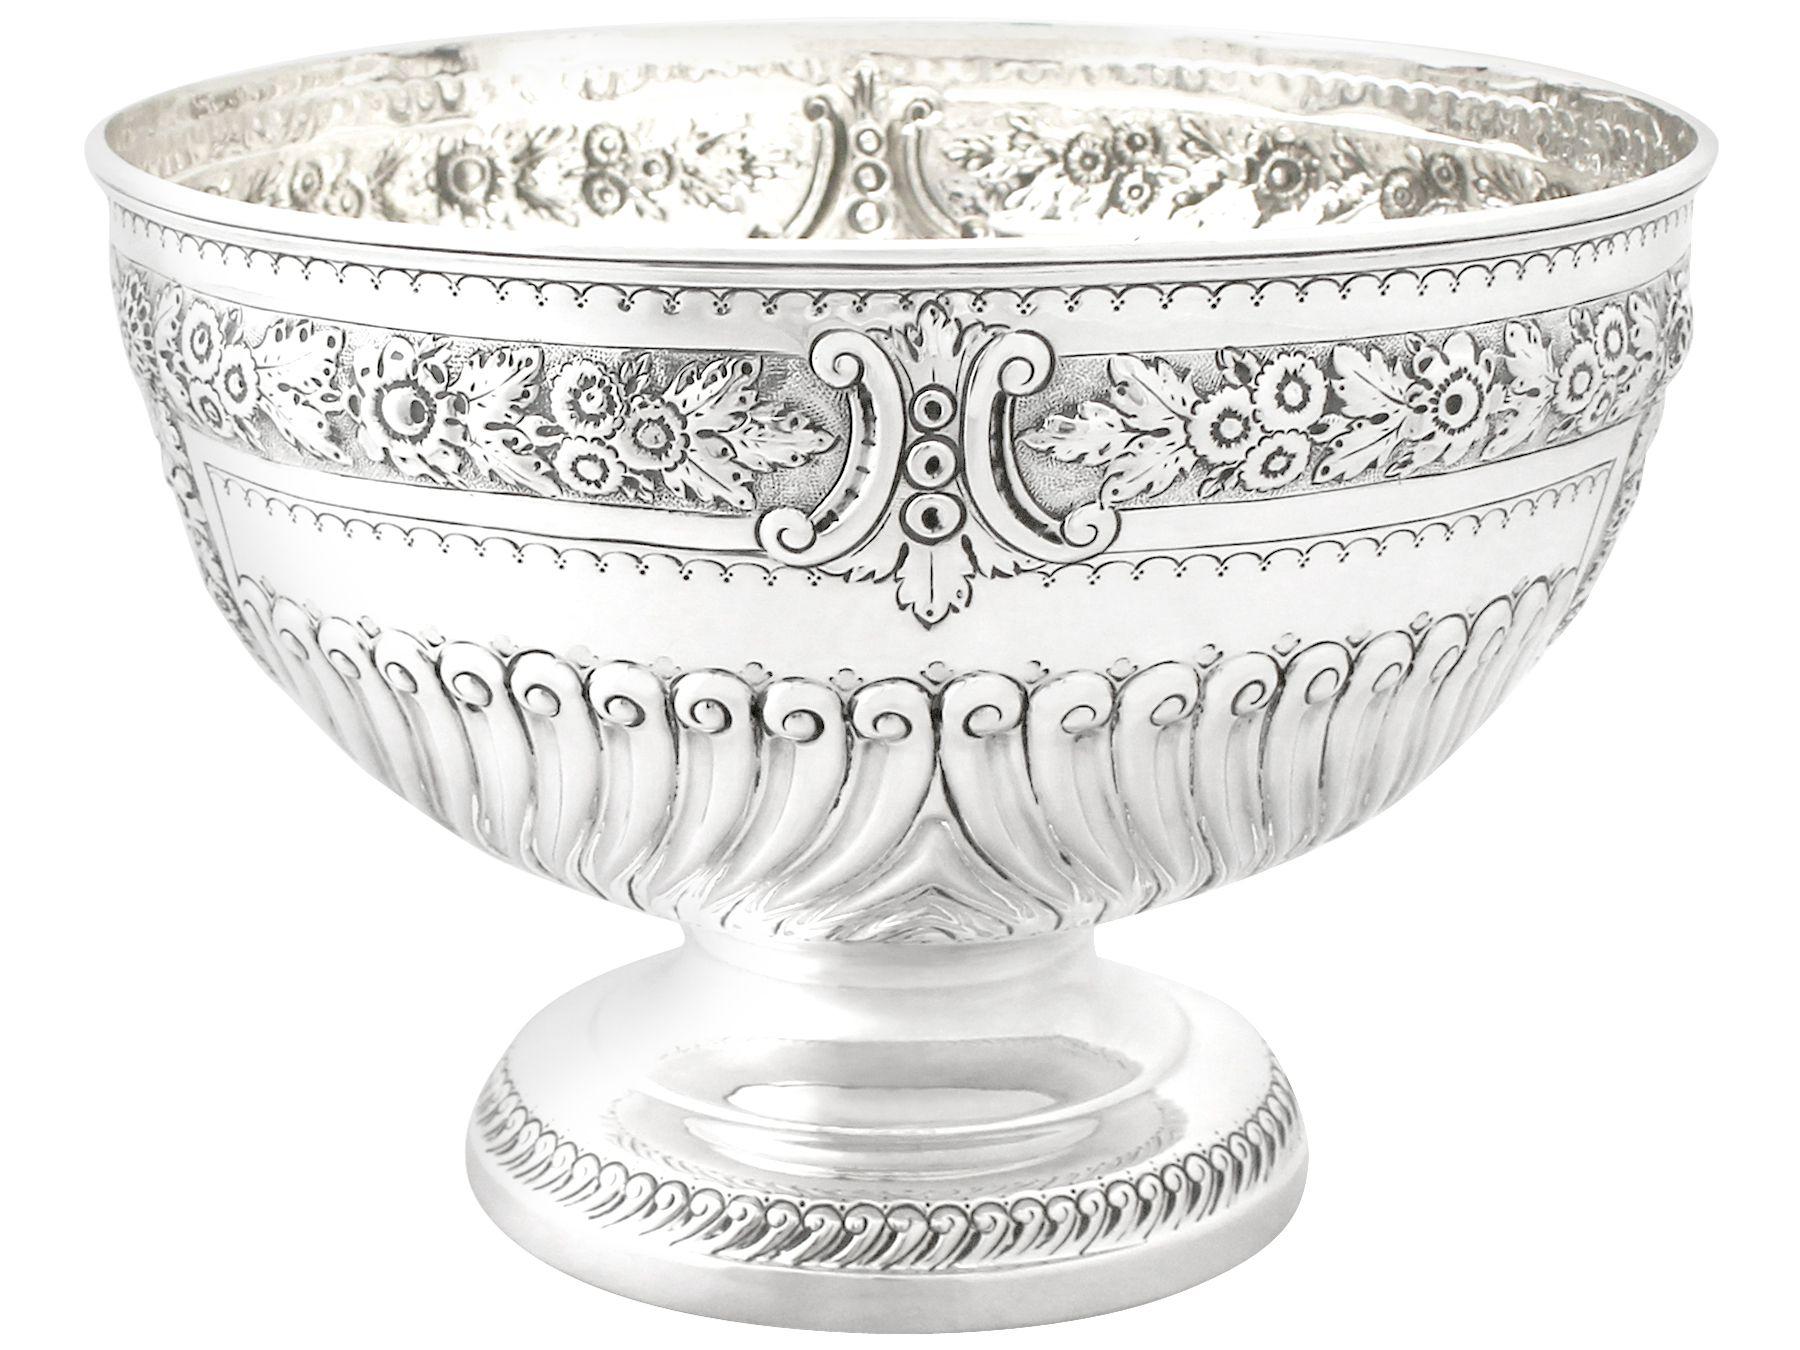 An exceptional, fine and impressive antique Victorian English sterling silver presentation bowl; an addition to our ornamental silverware collection

This exceptional antique sterling silver bowl has a circular form onto a circular domed